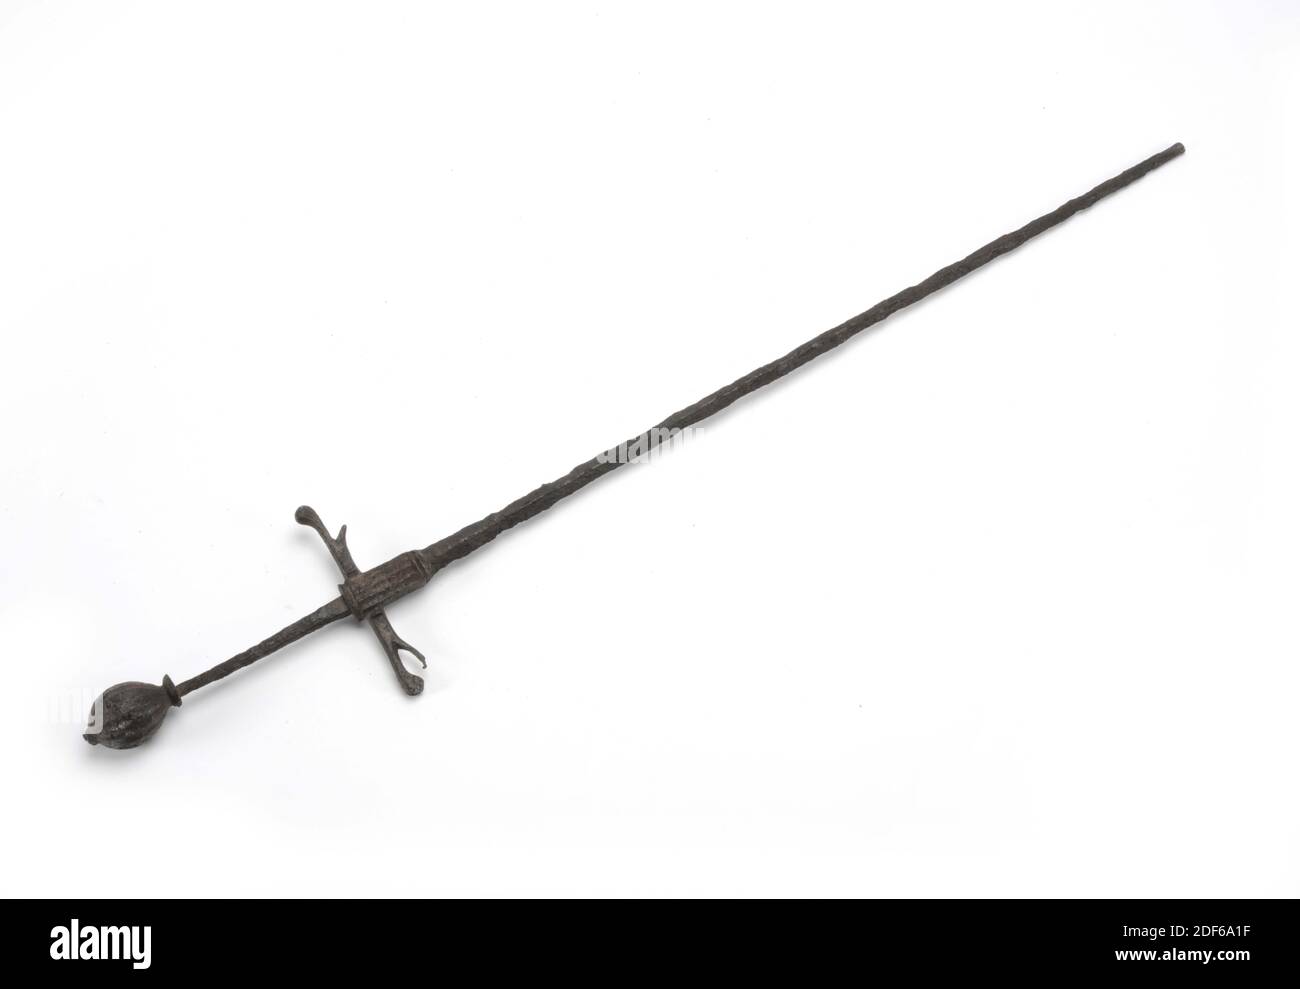 Epee, Anonymous, 17th century, forged, General: 61.3 x 10.5 x 3cm 613 x 105 x 30mm, Dough with hilt and forged iron guard. On the hilt a large, round hilt button. On both sides a double guardrail, 1892 Stock Photo